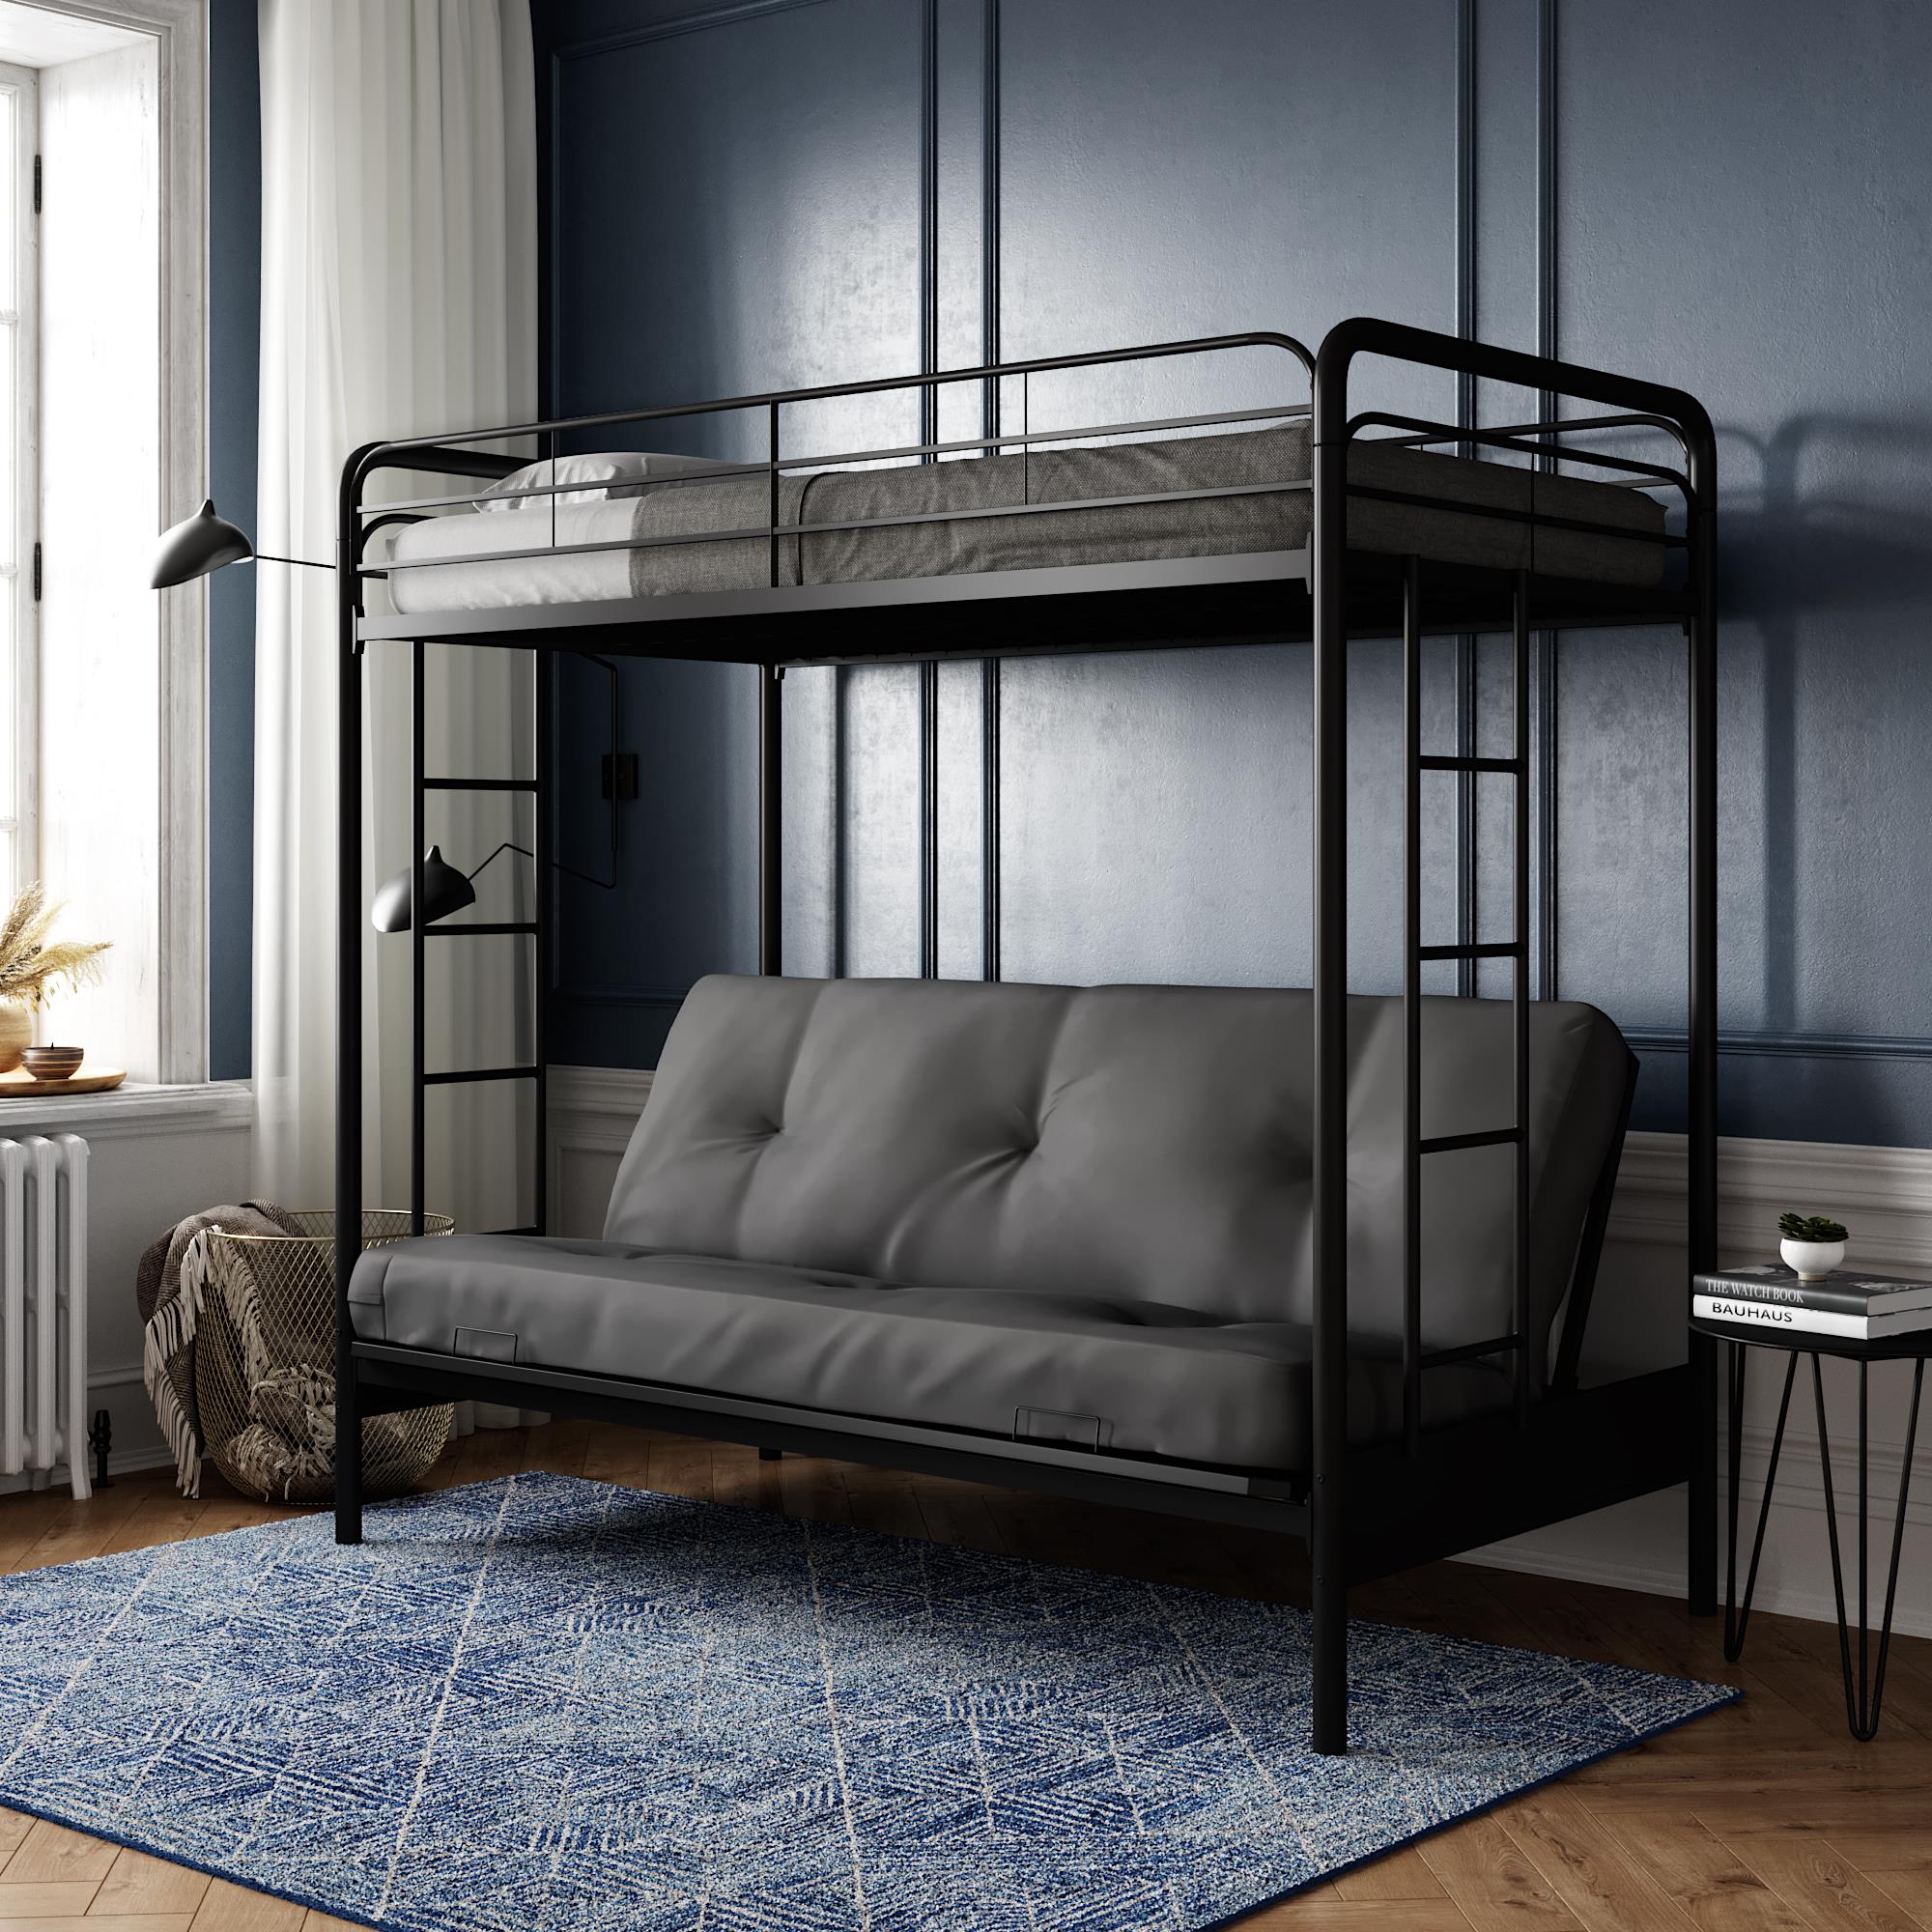 DHP Sammie Twin over Futon Metal Bunk Bed, Black - image 1 of 14